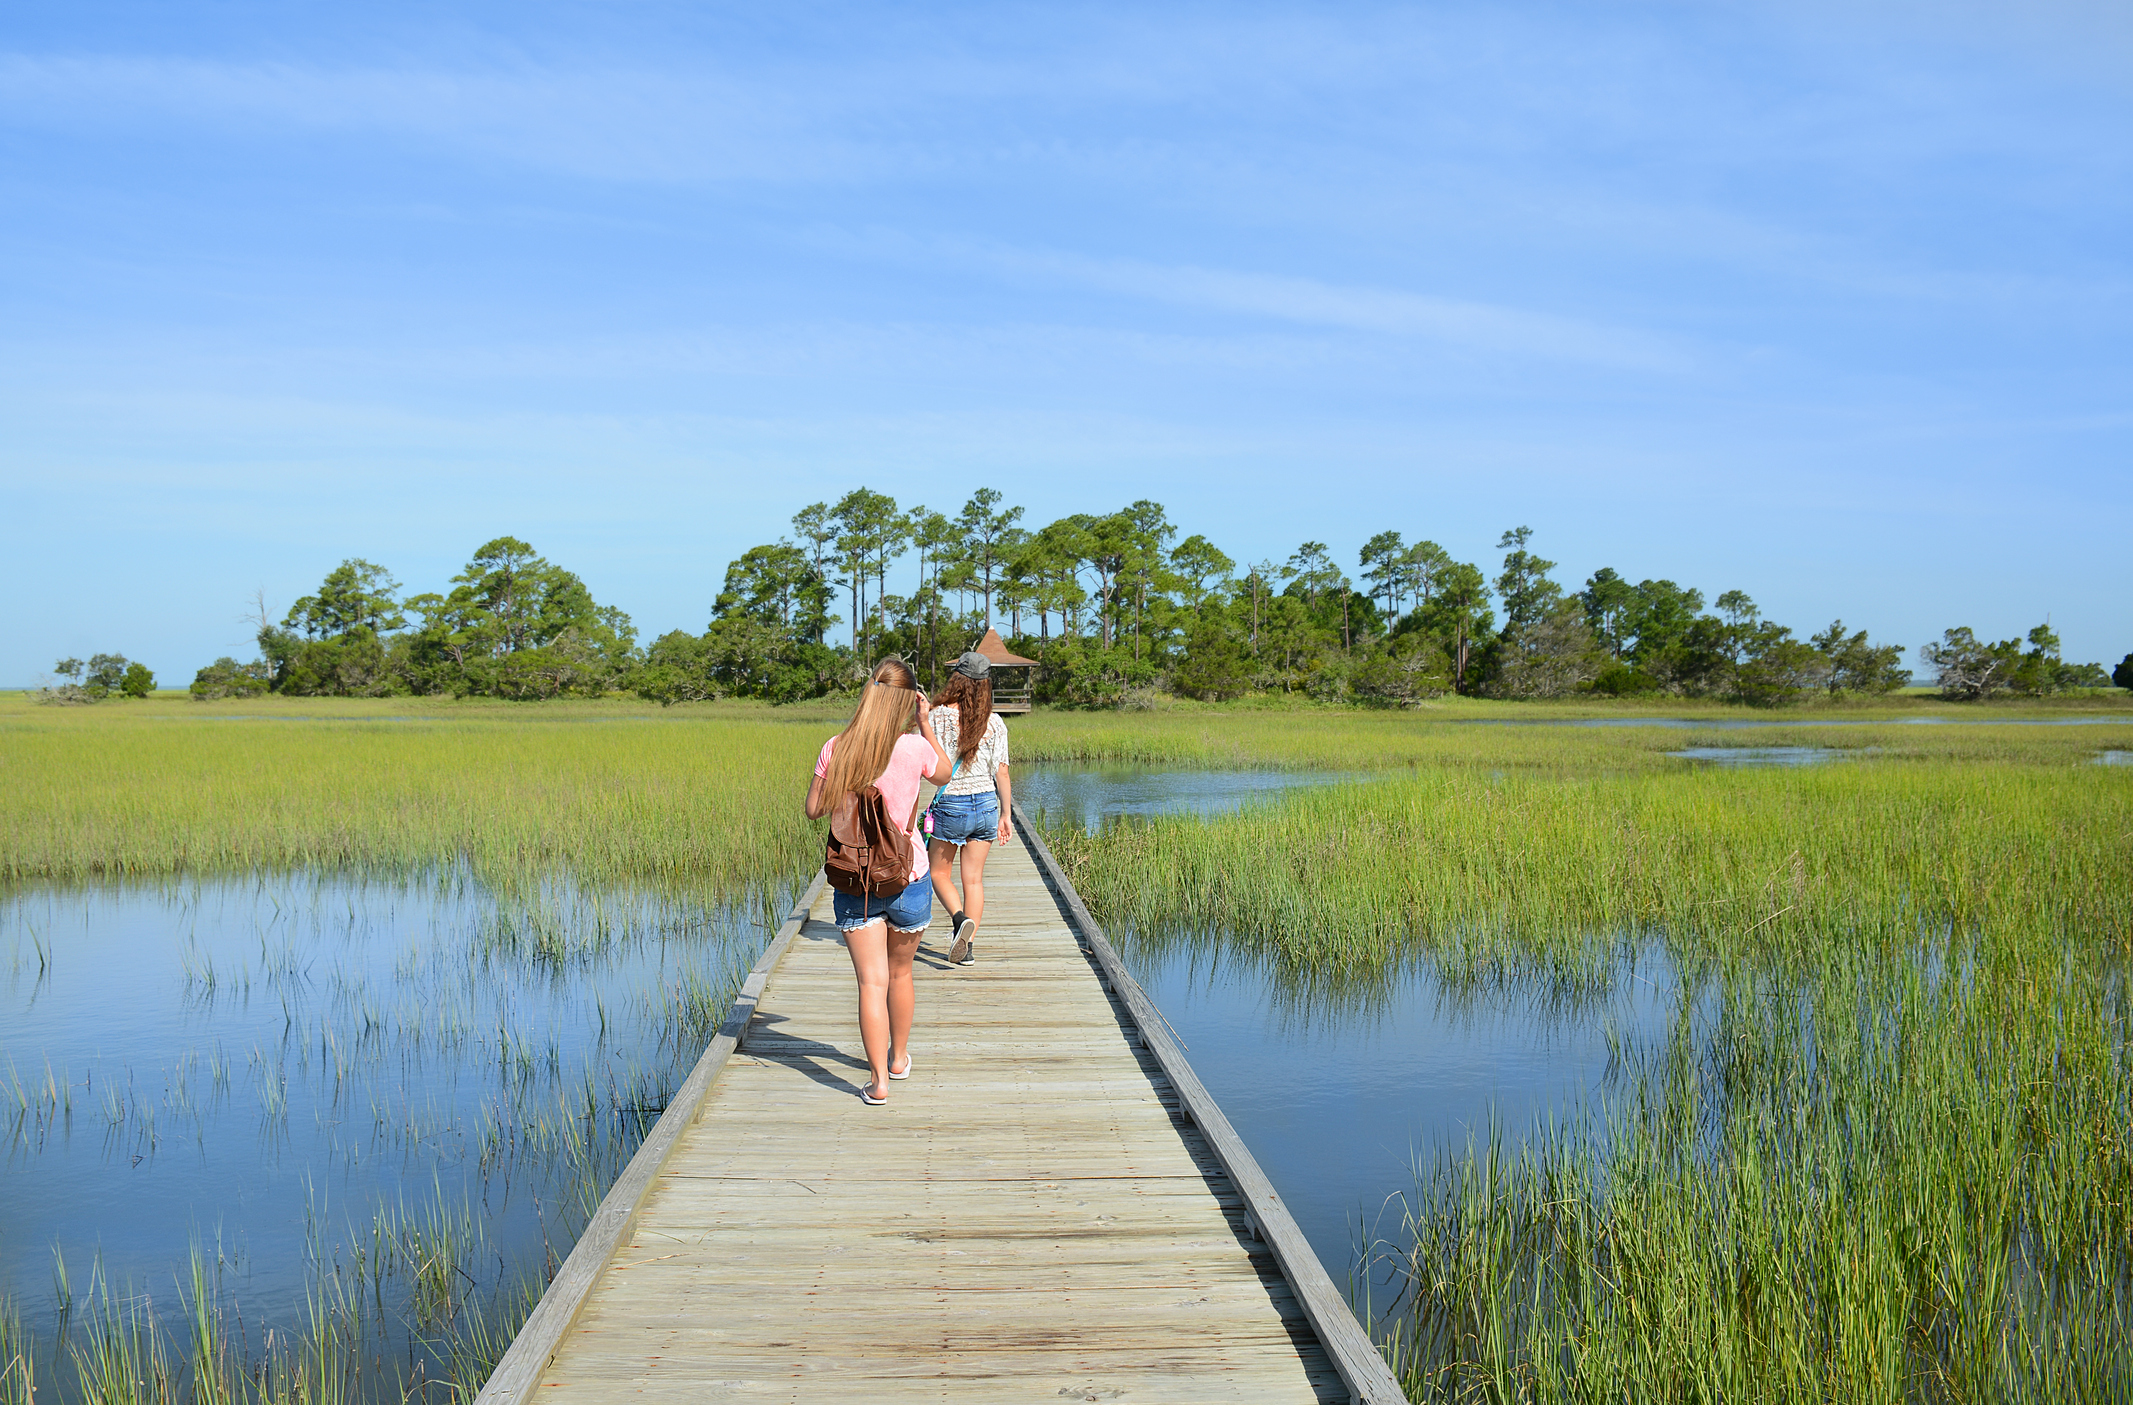 Two people walk out on a boardwalk in a nature viewing area